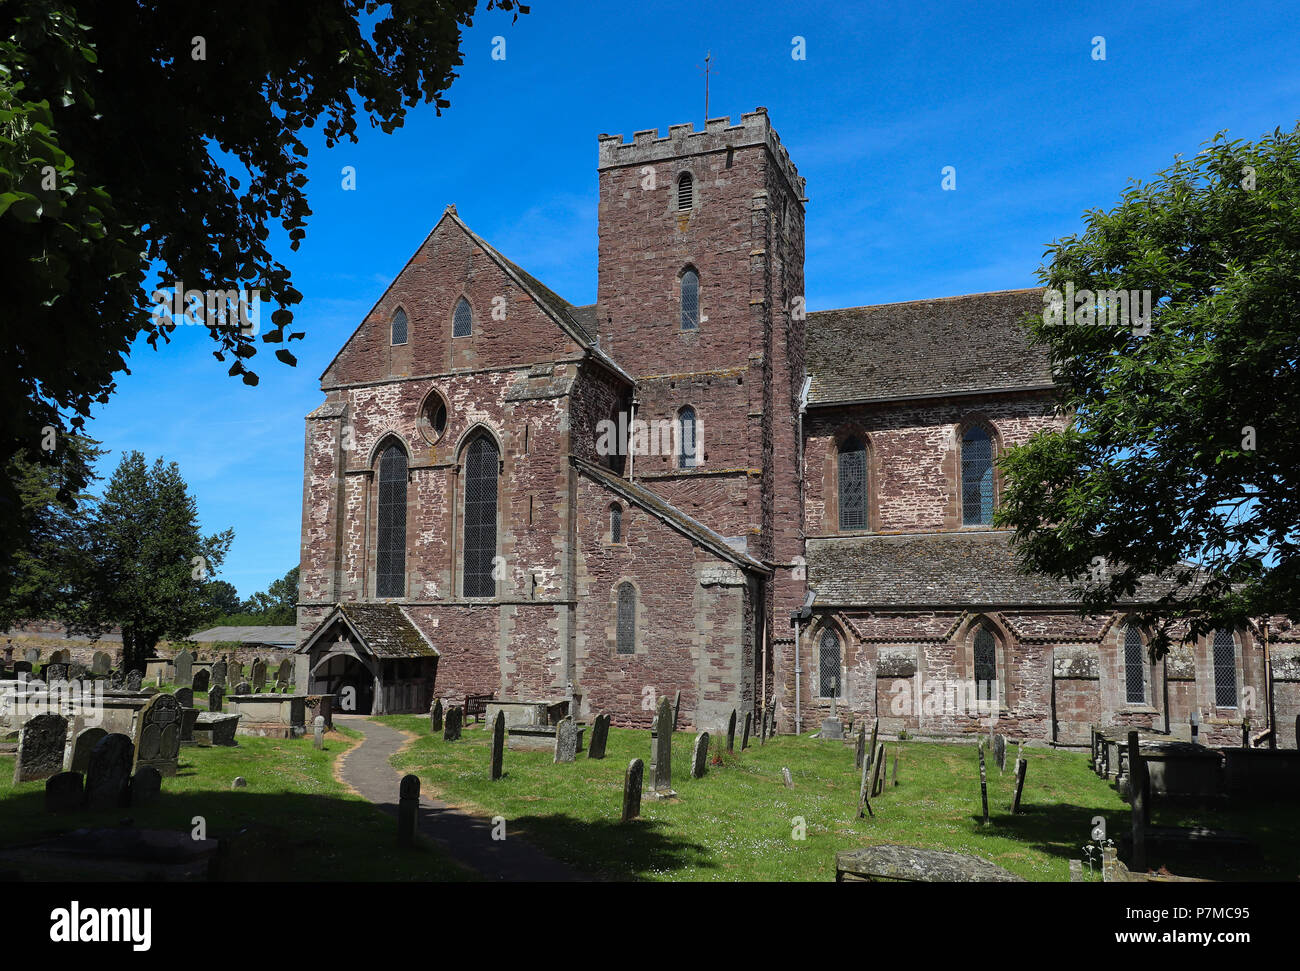 Dore Abbey, a 12th C. former Cistercian abbey, now a parish church since 1634, is constructed of sandstone. Located In Golden Valley, Herefordshire,UK Stock Photo